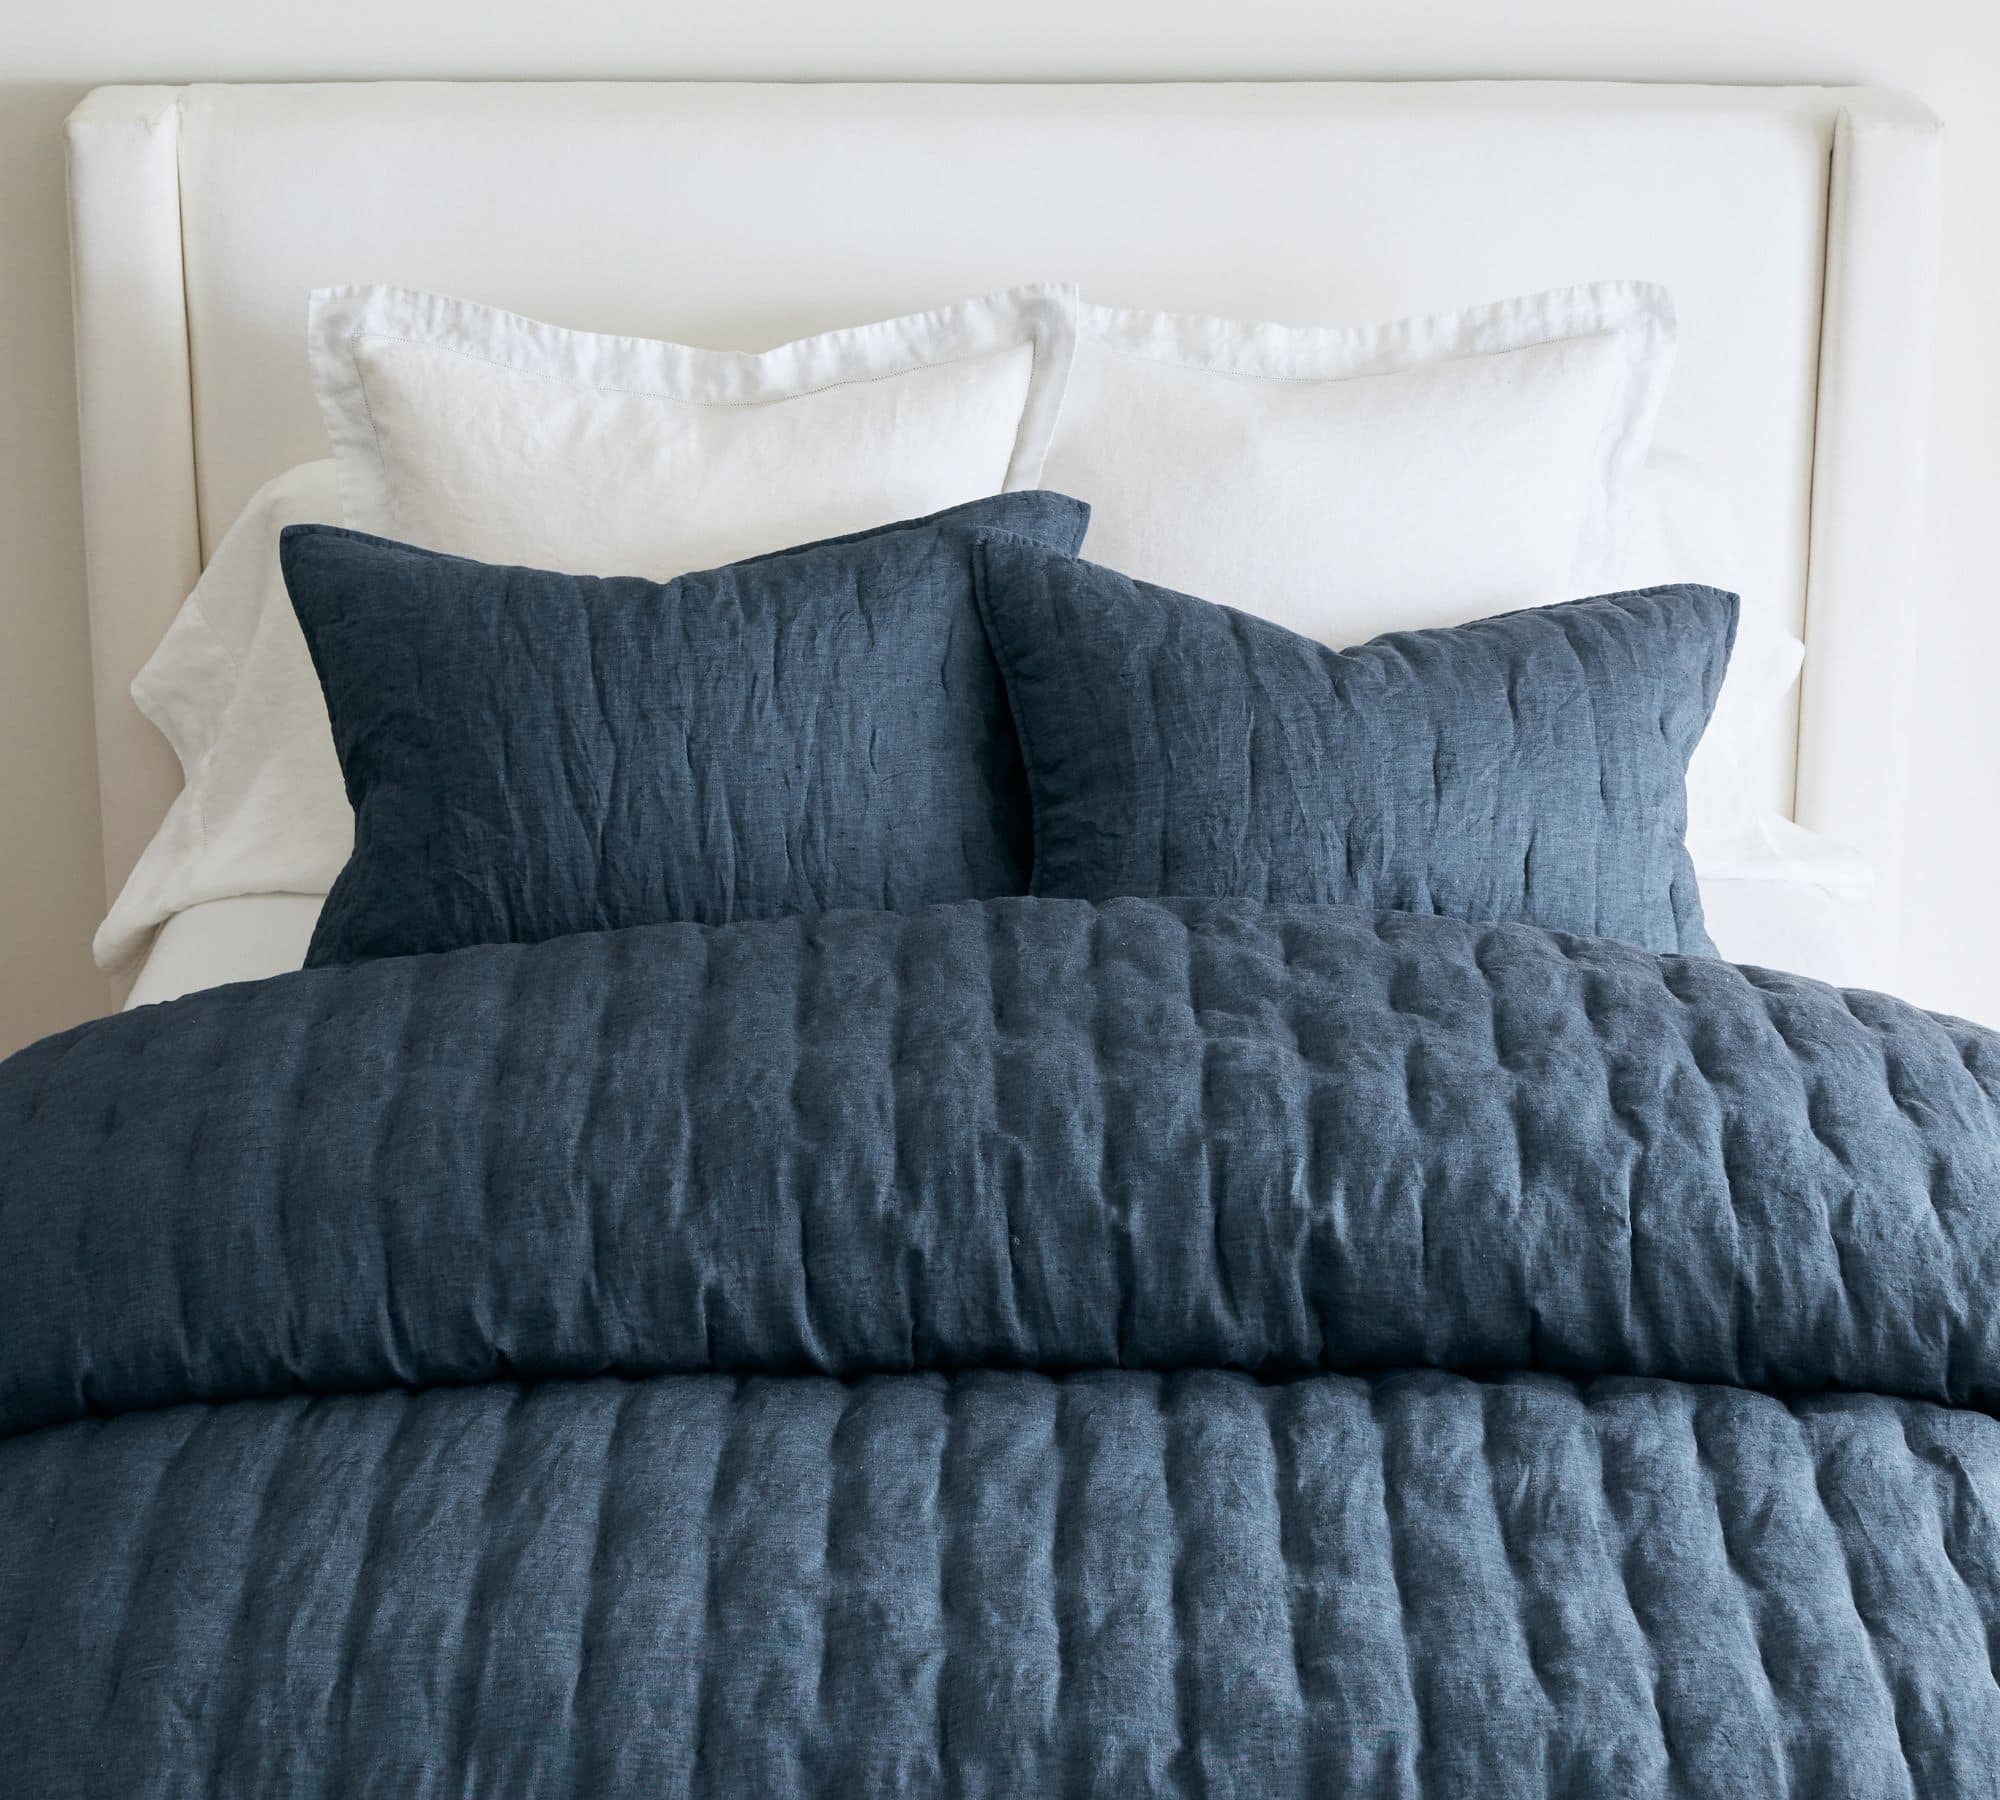 navy comforter and matching throw pillows on a white upholstered bed.